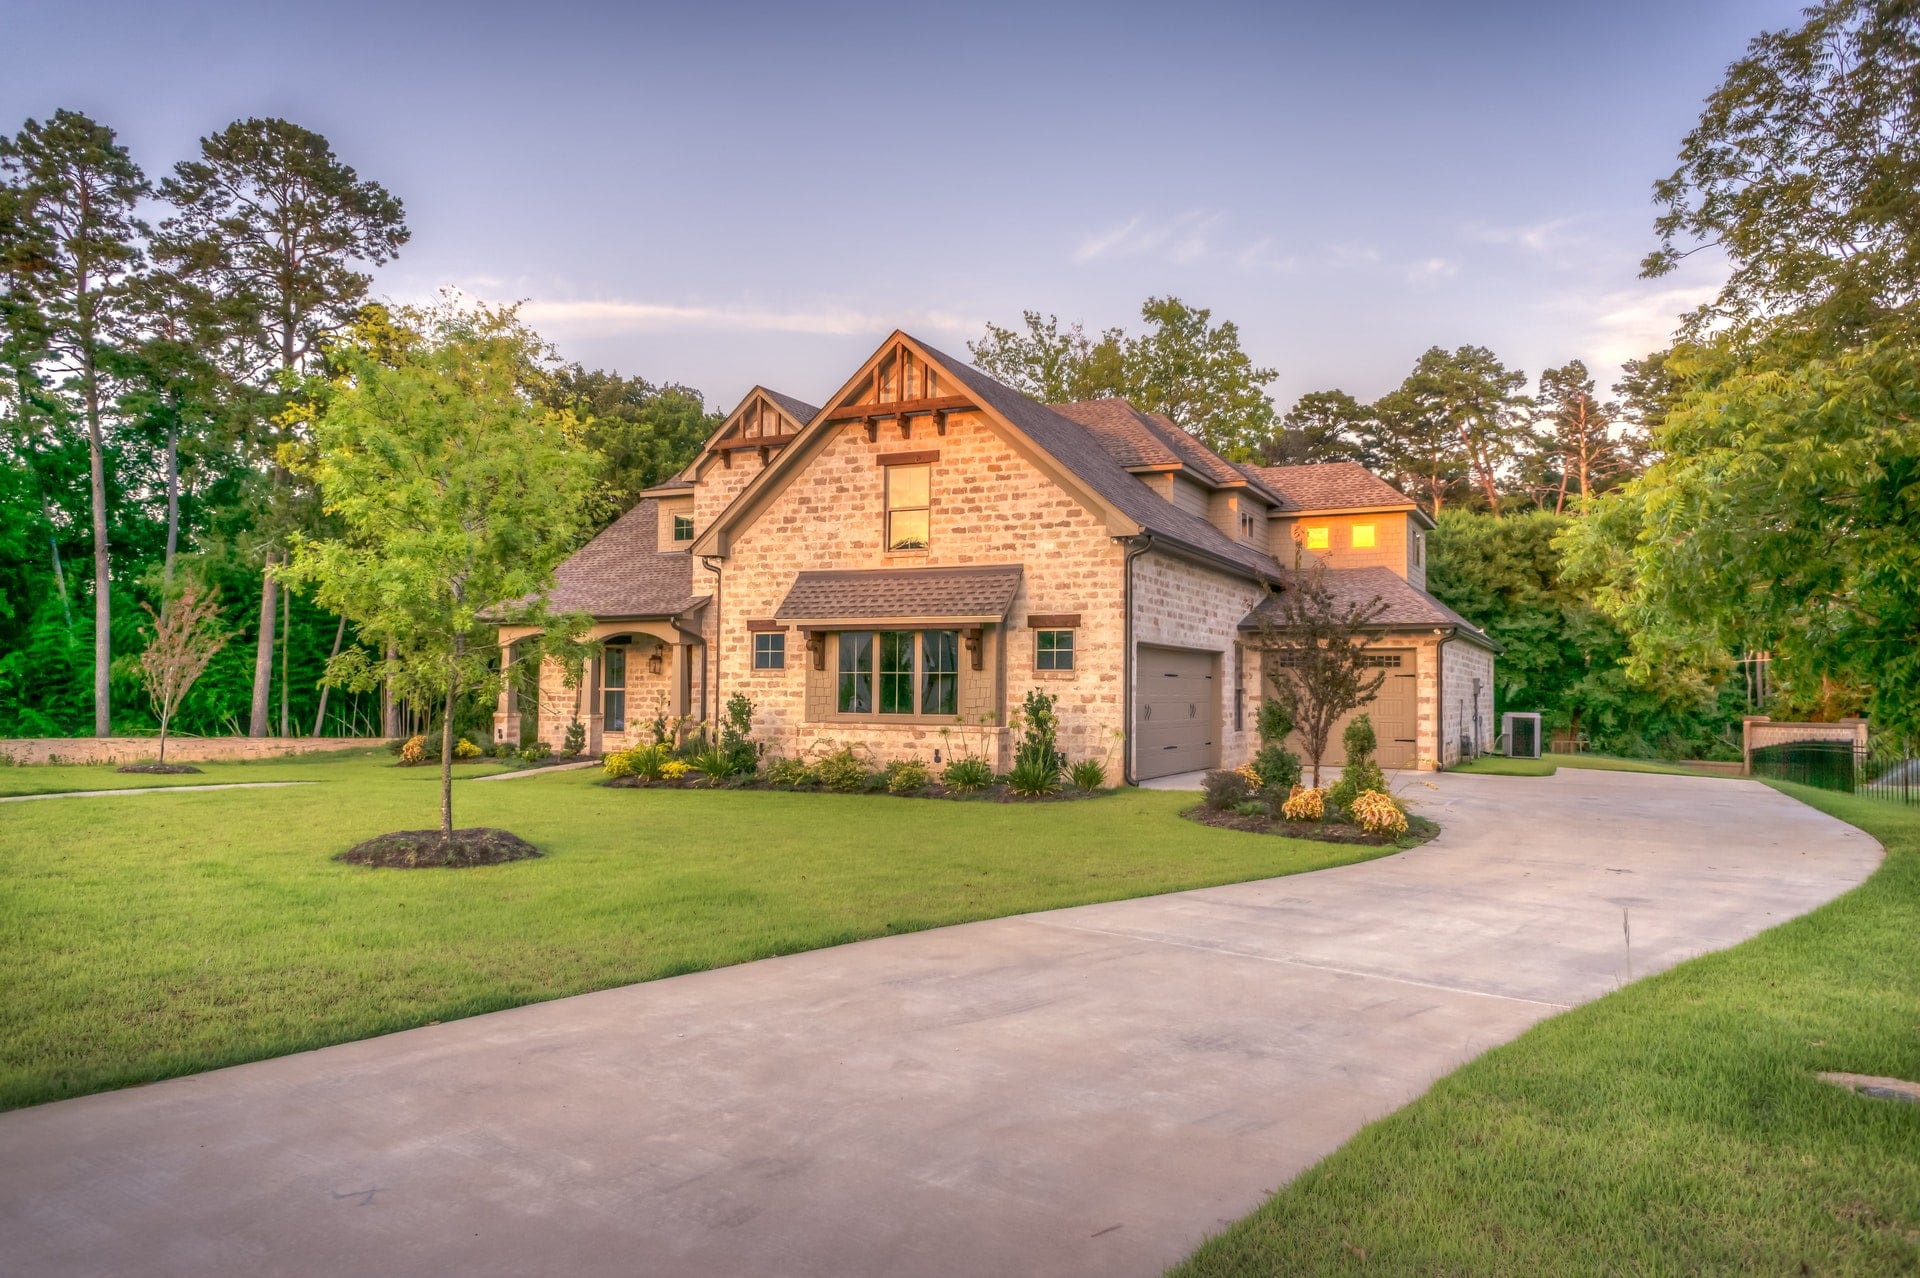 Photo of brown stone home at sunset with lush green yard.  